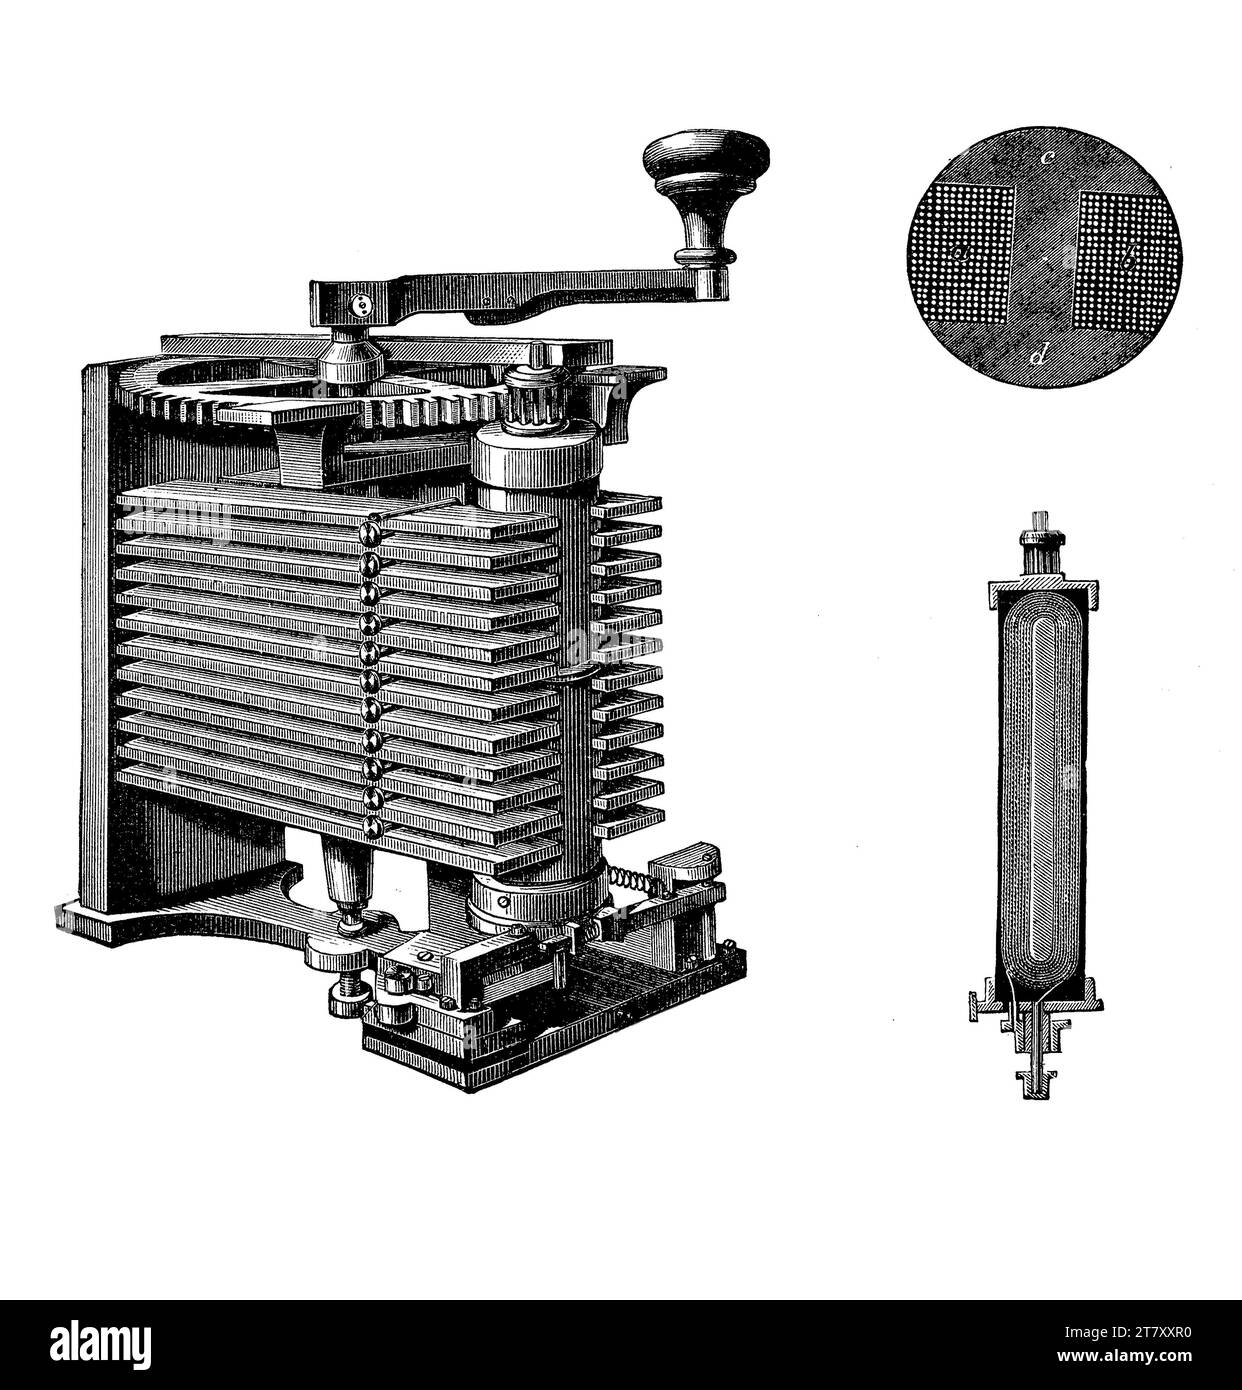 Cylinder induction machine, electric generator with a double-T armature winding by Werner von Siemens, 19th century Stock Photo